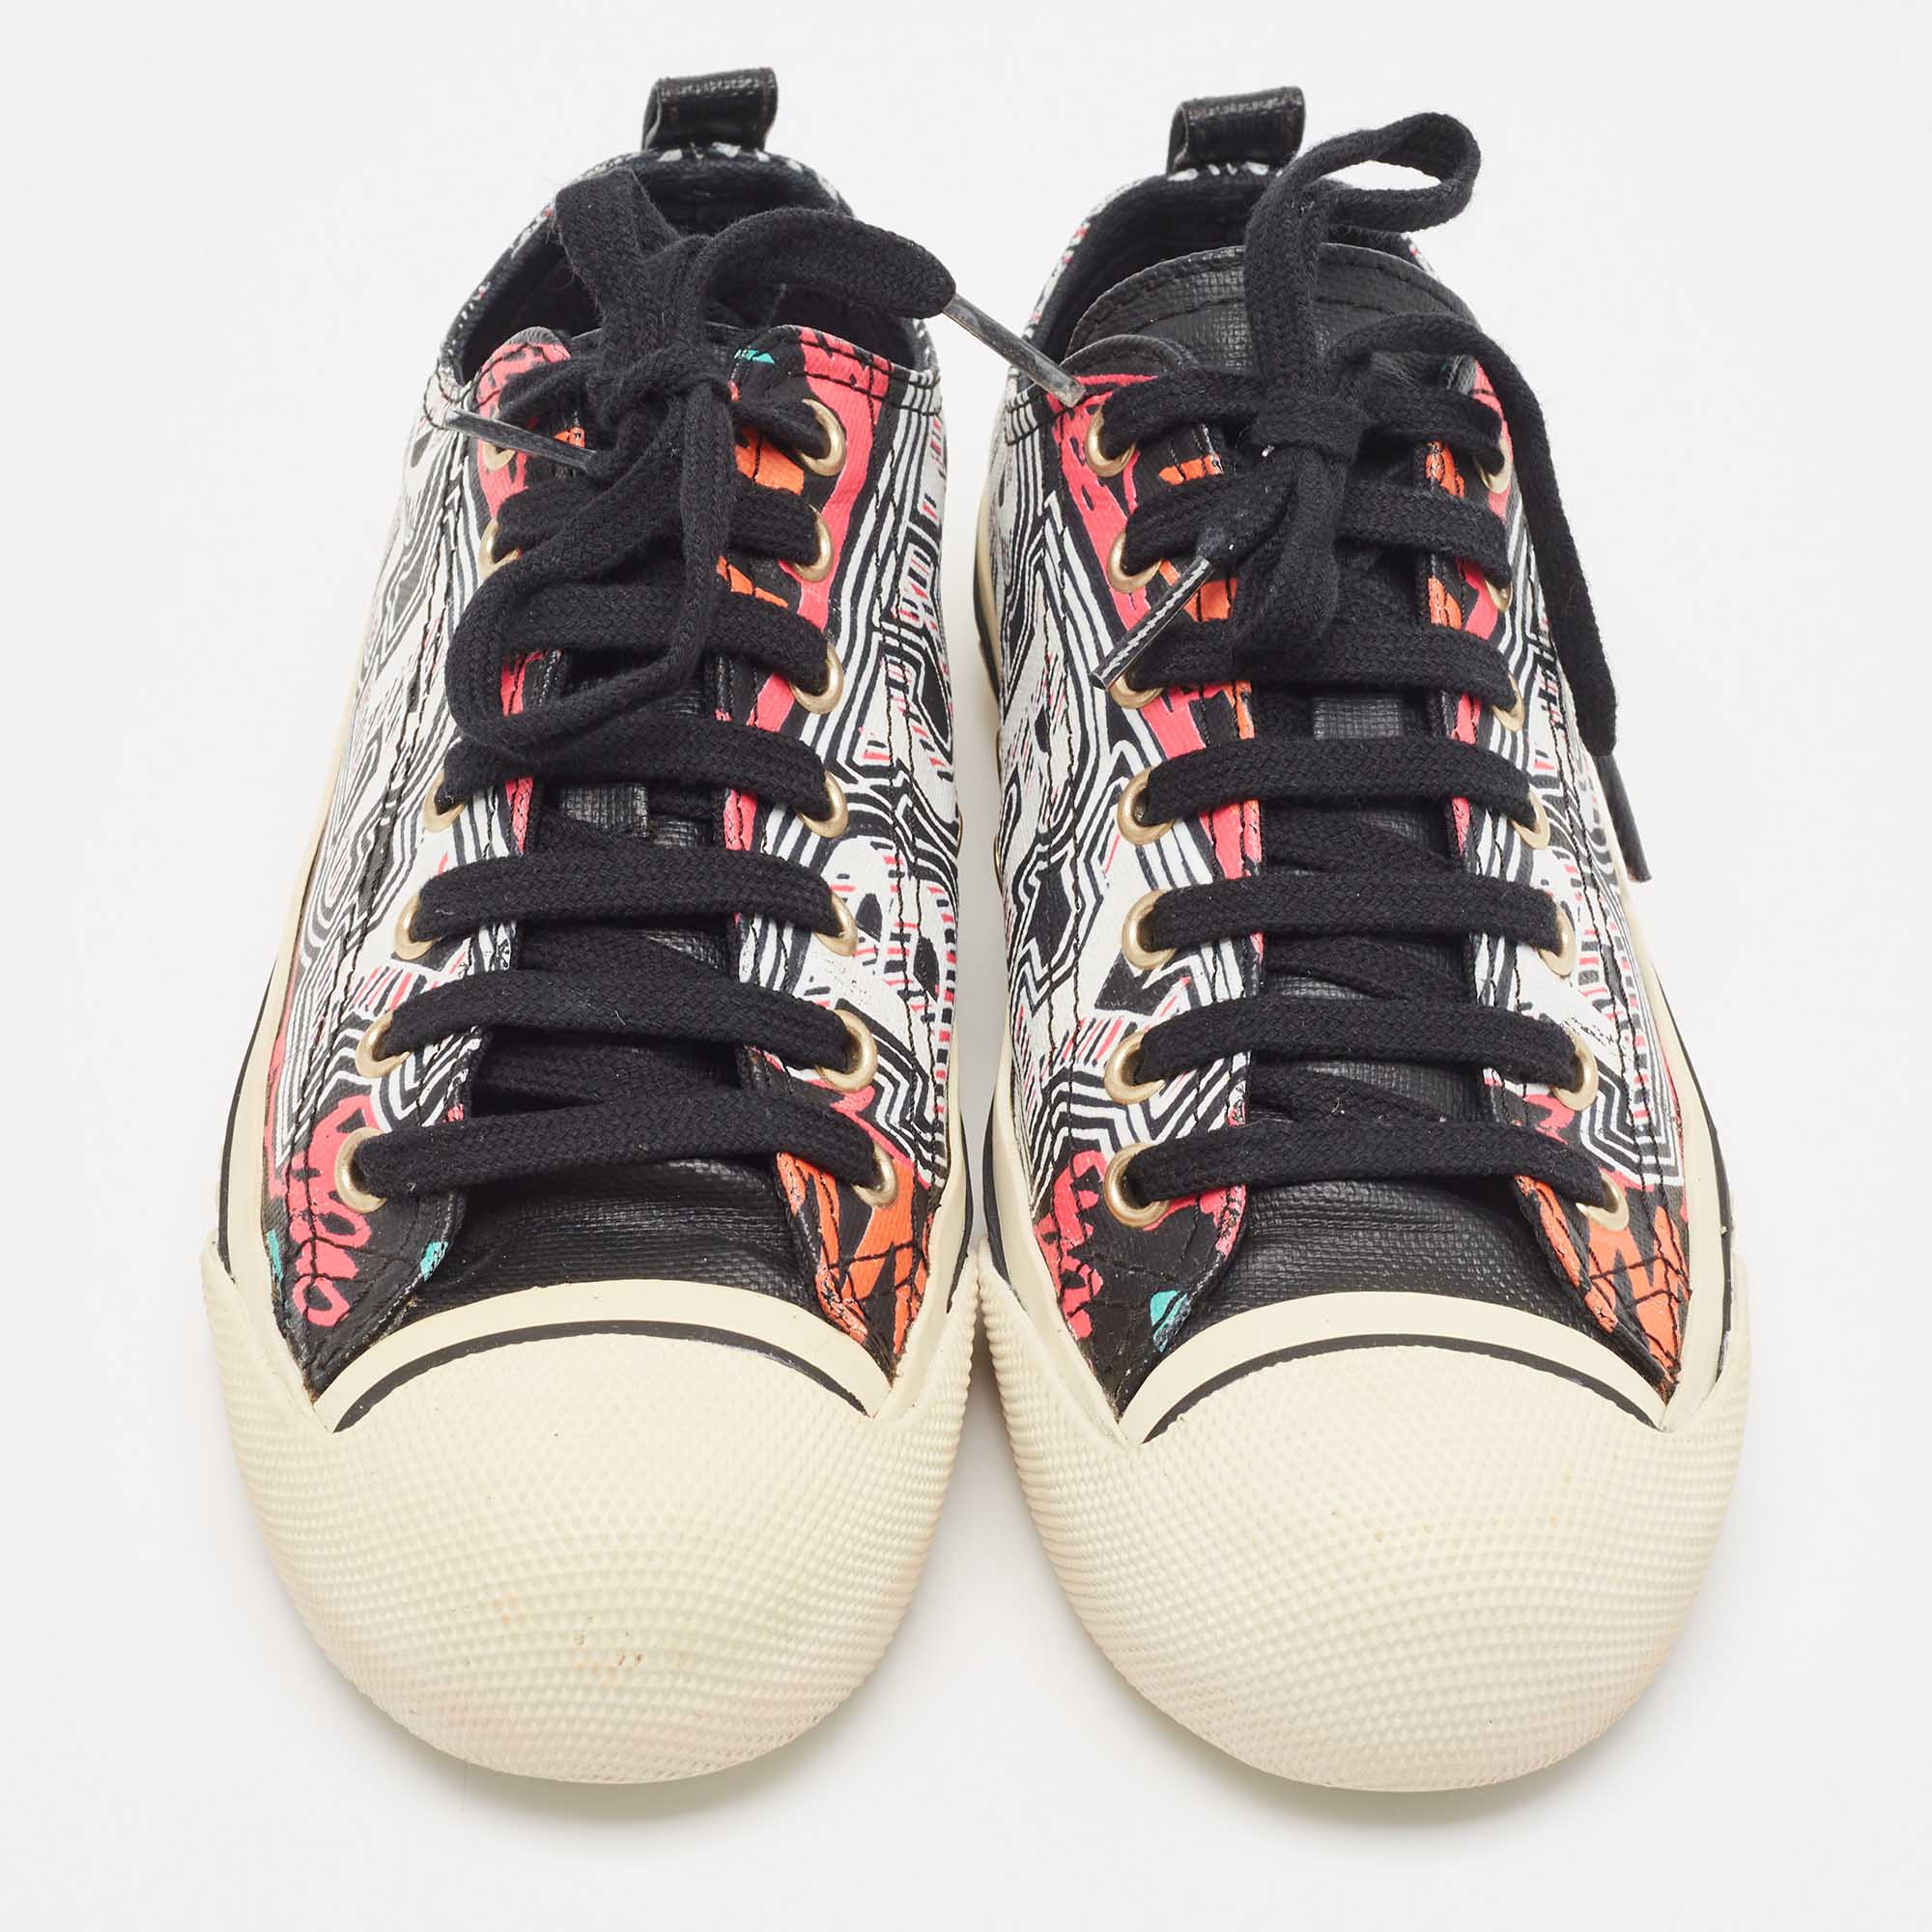 Burberry Multicolor Coated Canvas Kingly Mark Print Low Top Sneakers Size 35